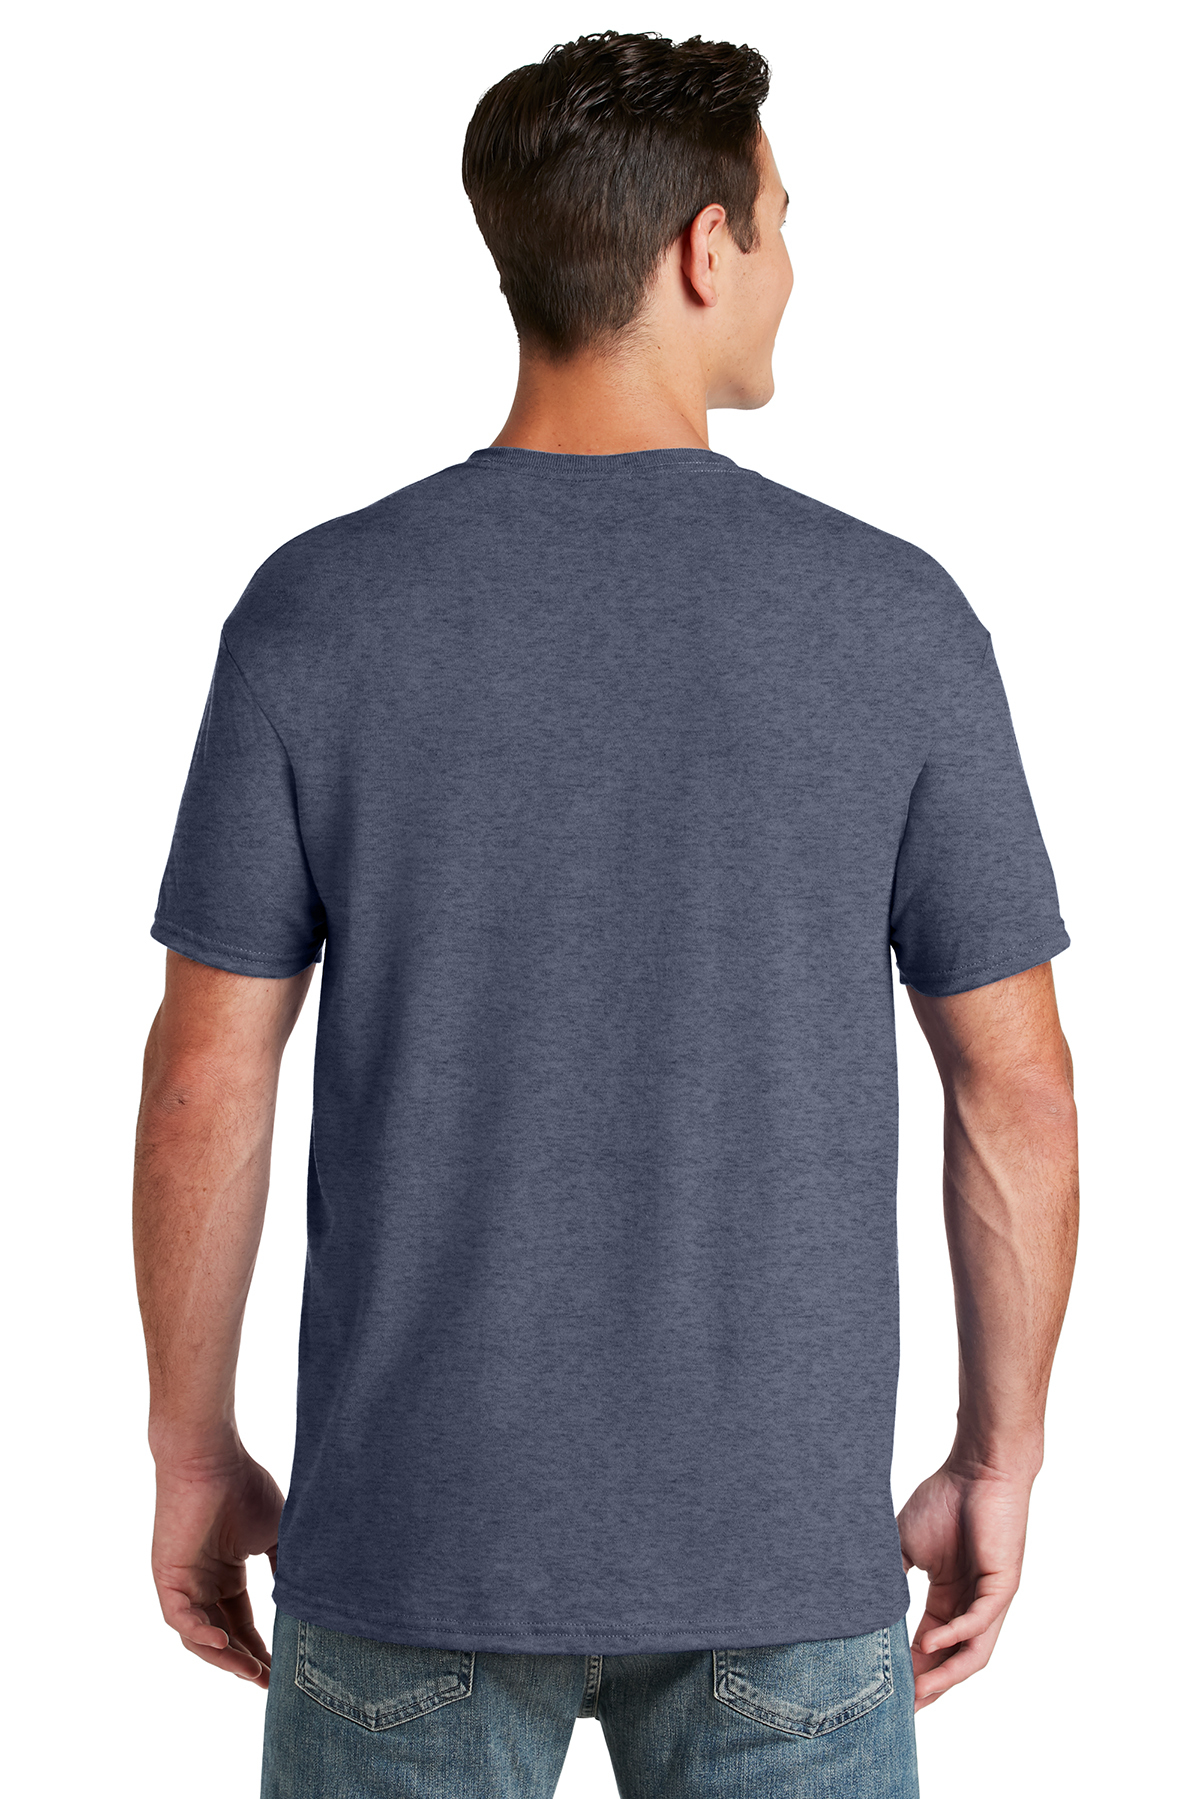 Jerzees - Dri-Power 50/50 Cotton/Poly T-Shirt | Product | Company Casuals